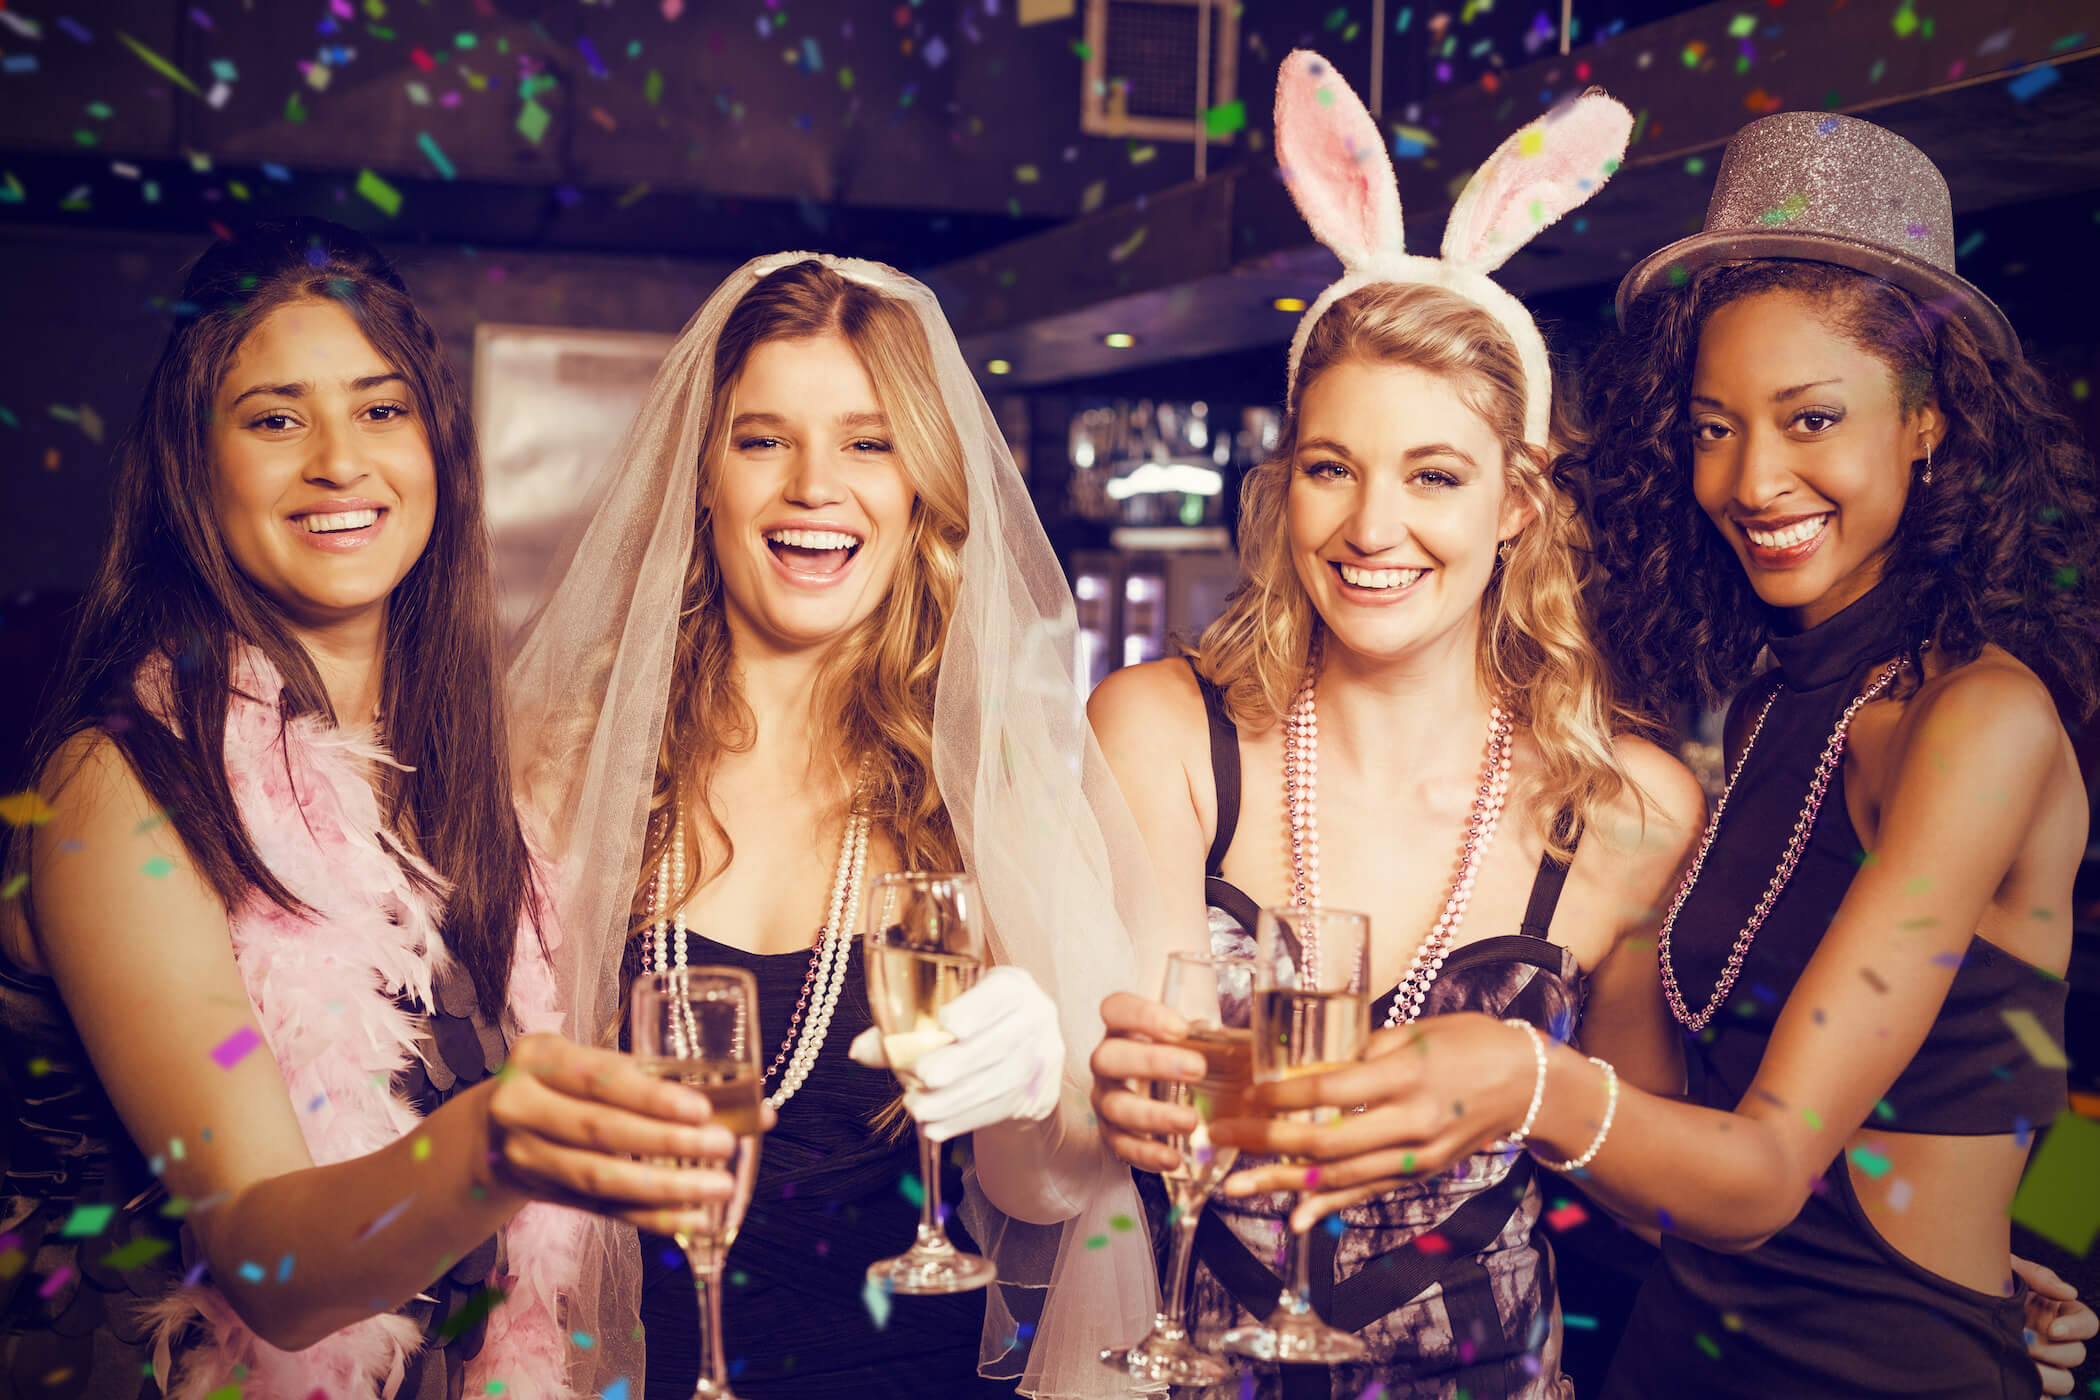 What to Wear to Your Bachelorette Party